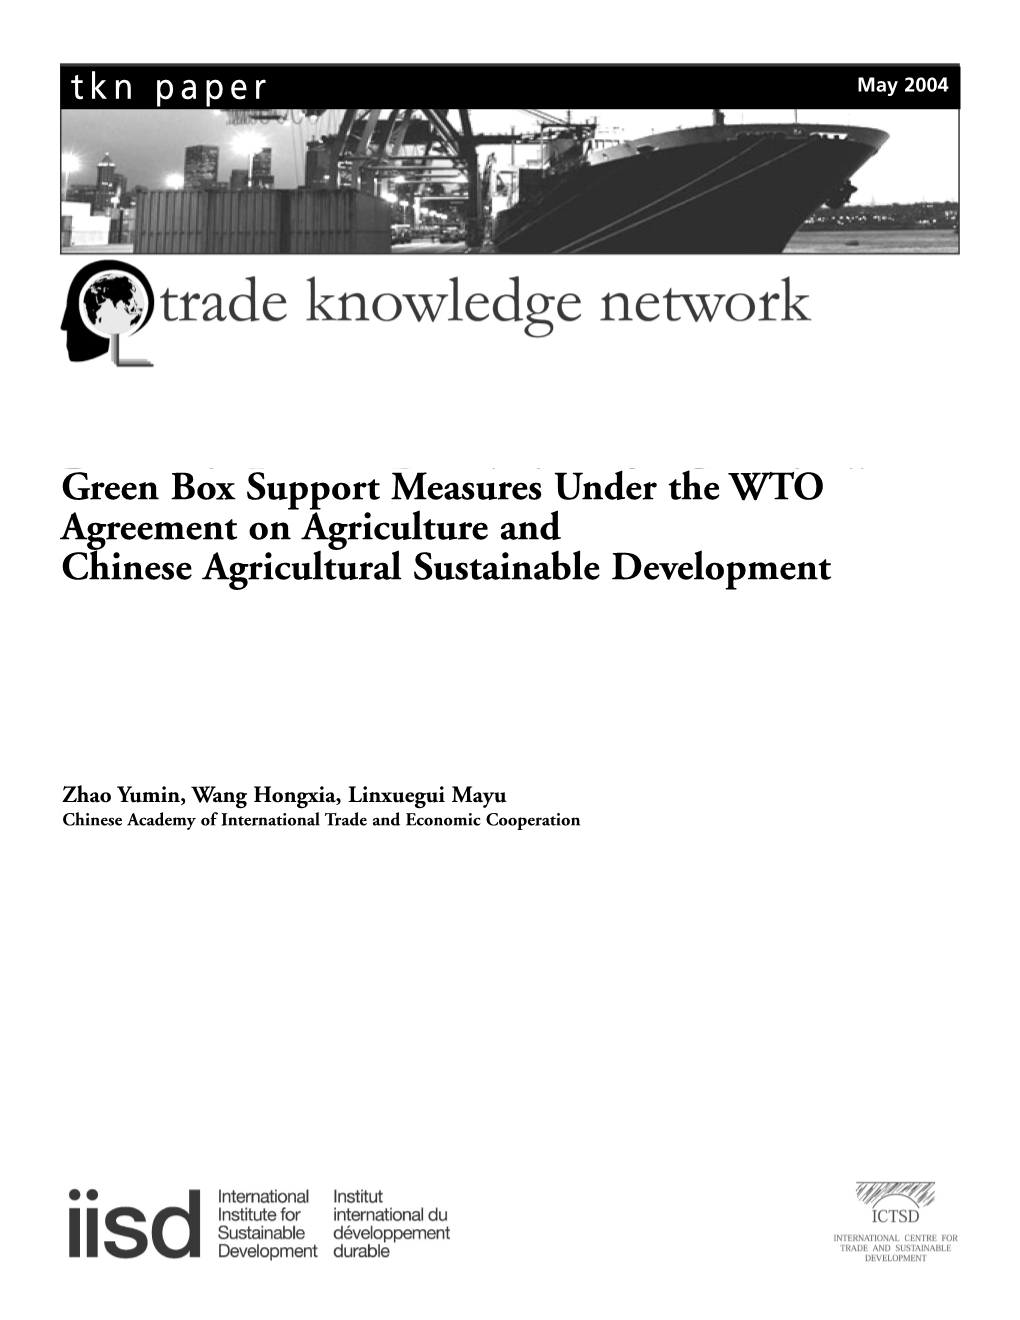 Green Box Support Measures Under the WTO Agreement on Agriculture and Chinese Agricultural Sustainable Development